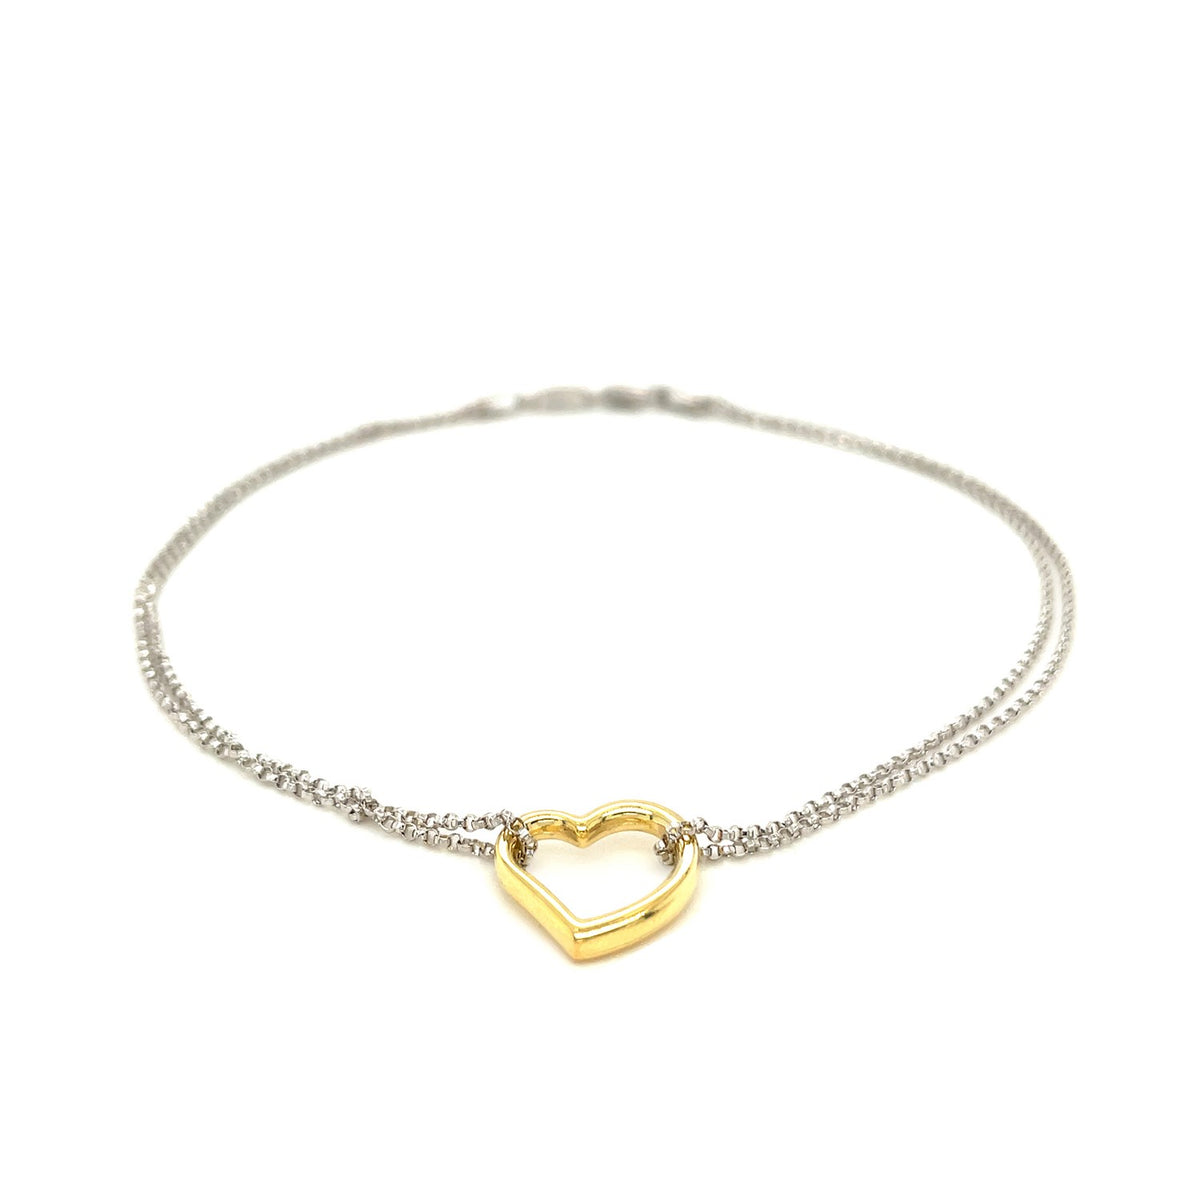 Single Open Heart Station Anklet - 14k Yellow Gold and Sterling Silver